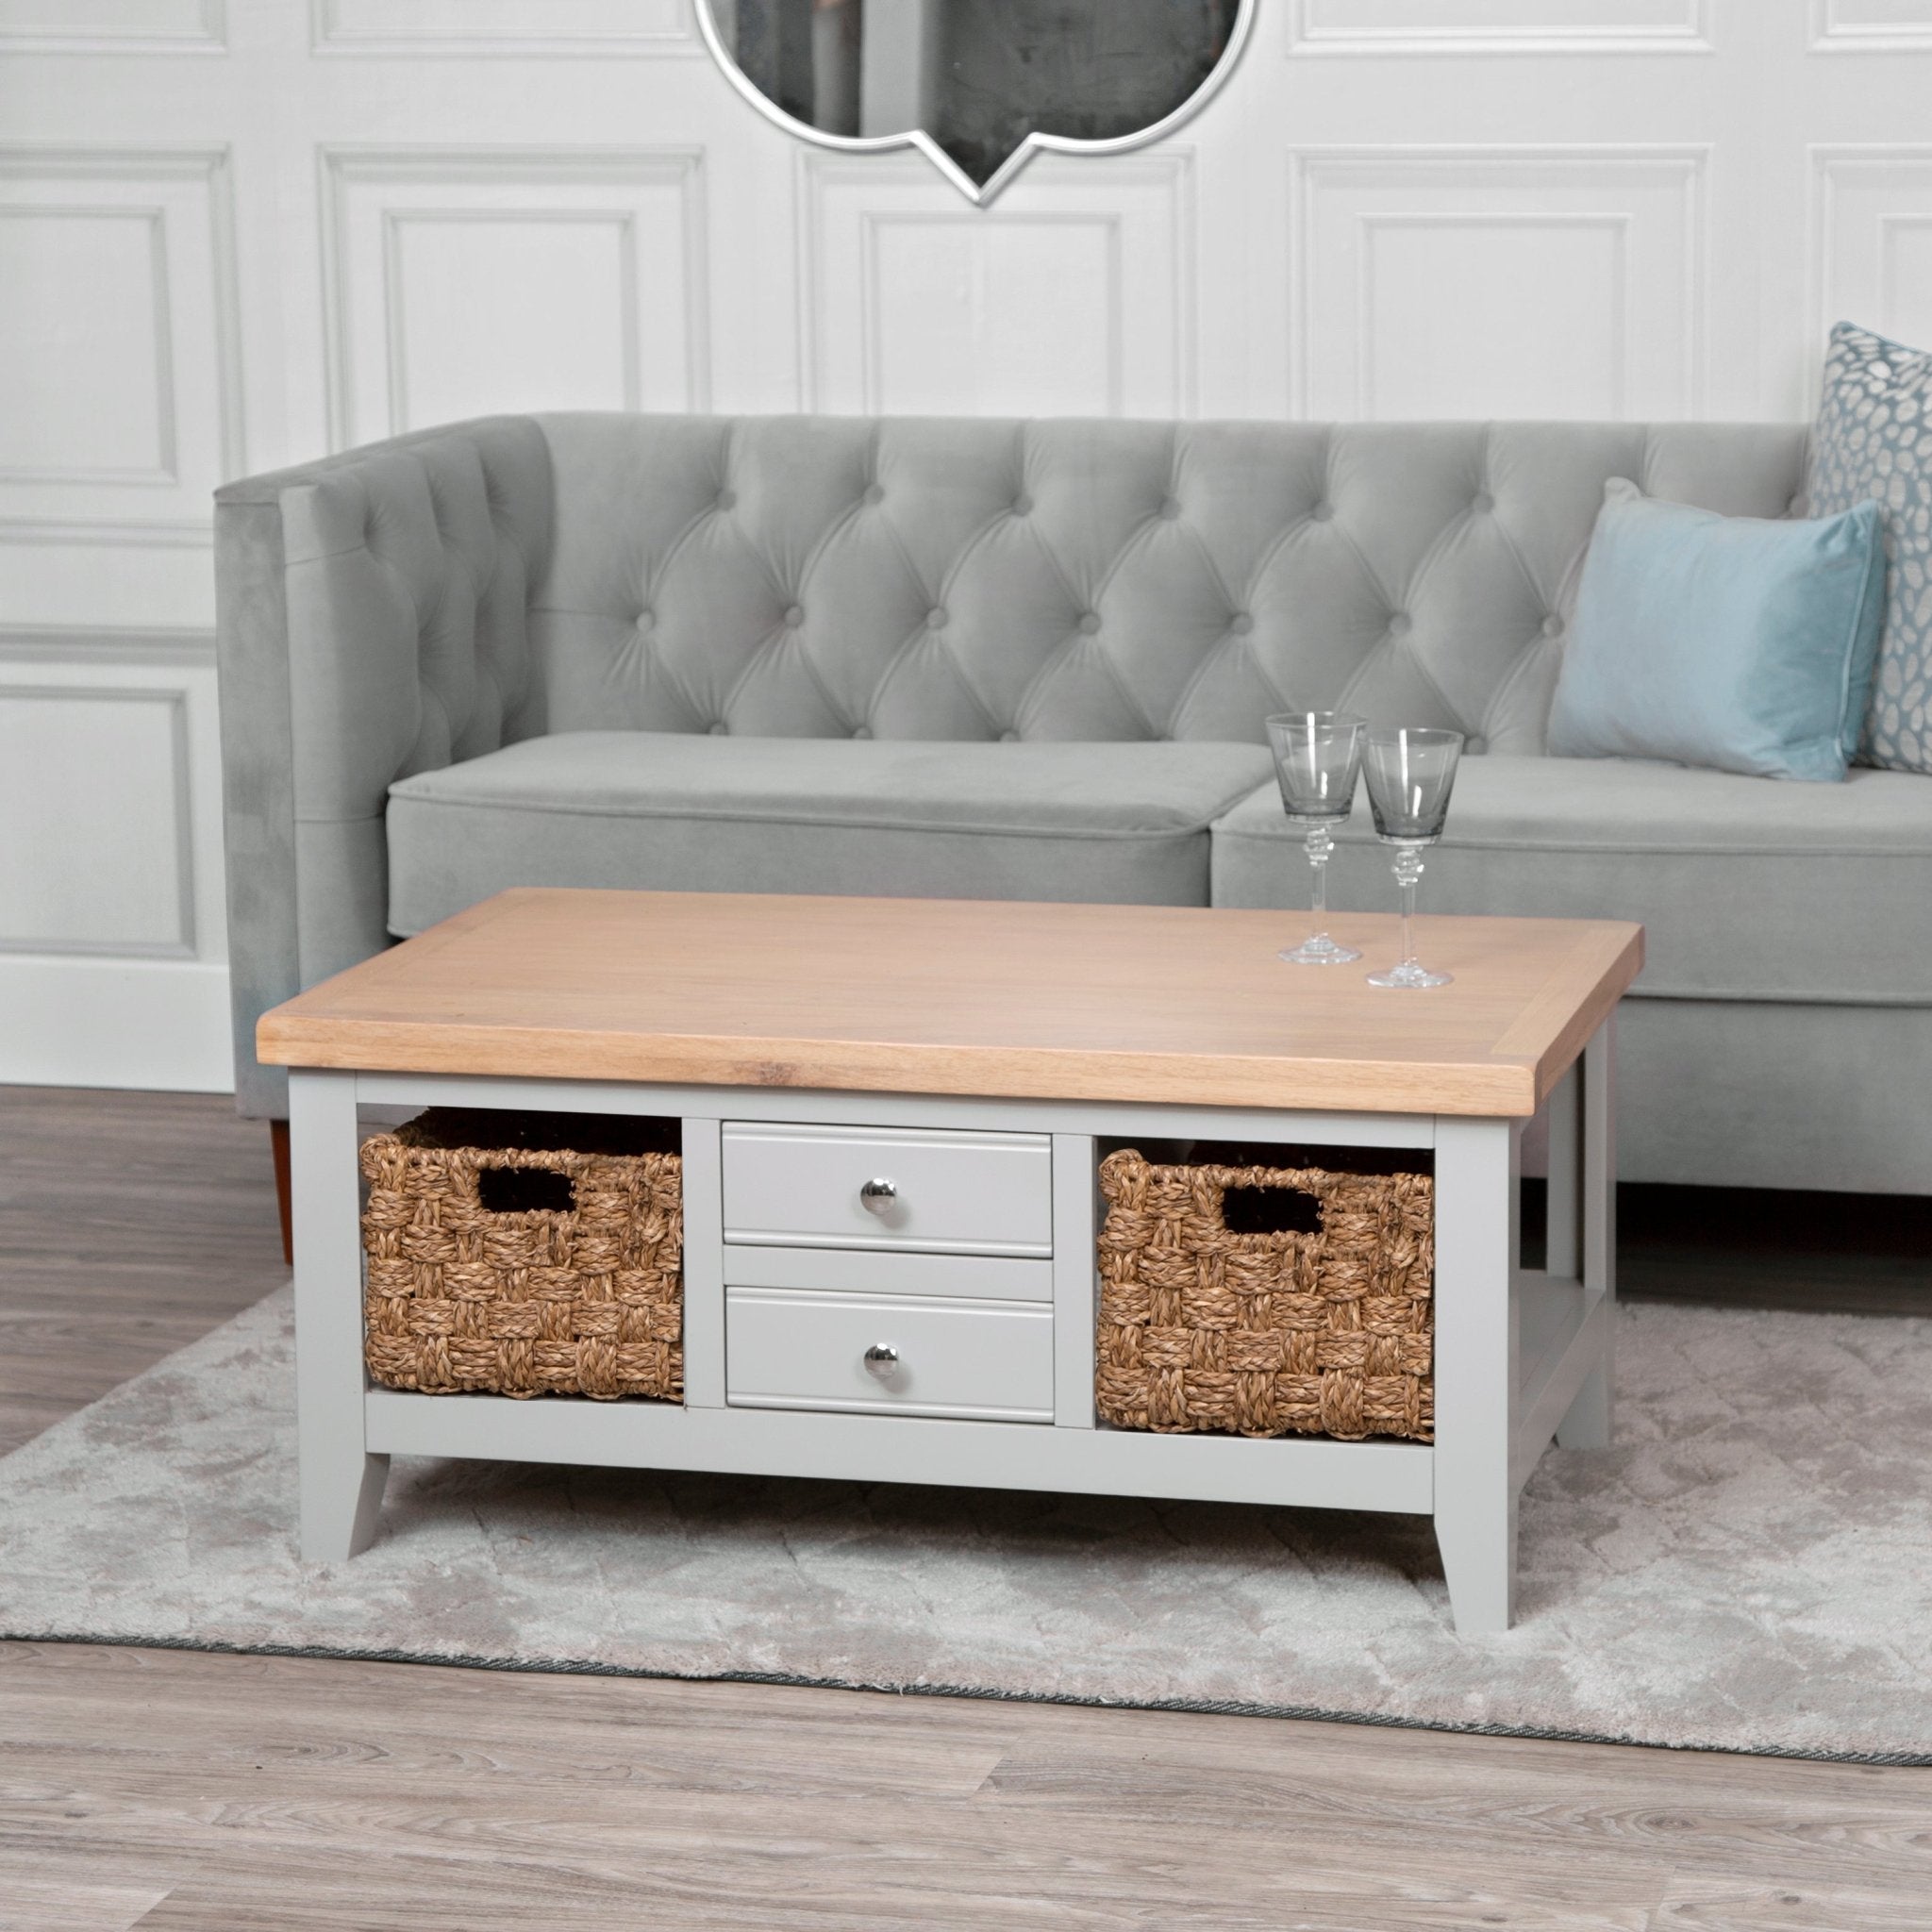 Loxhill Grey Coffee Table with Baskets - Duck Barn Interiors